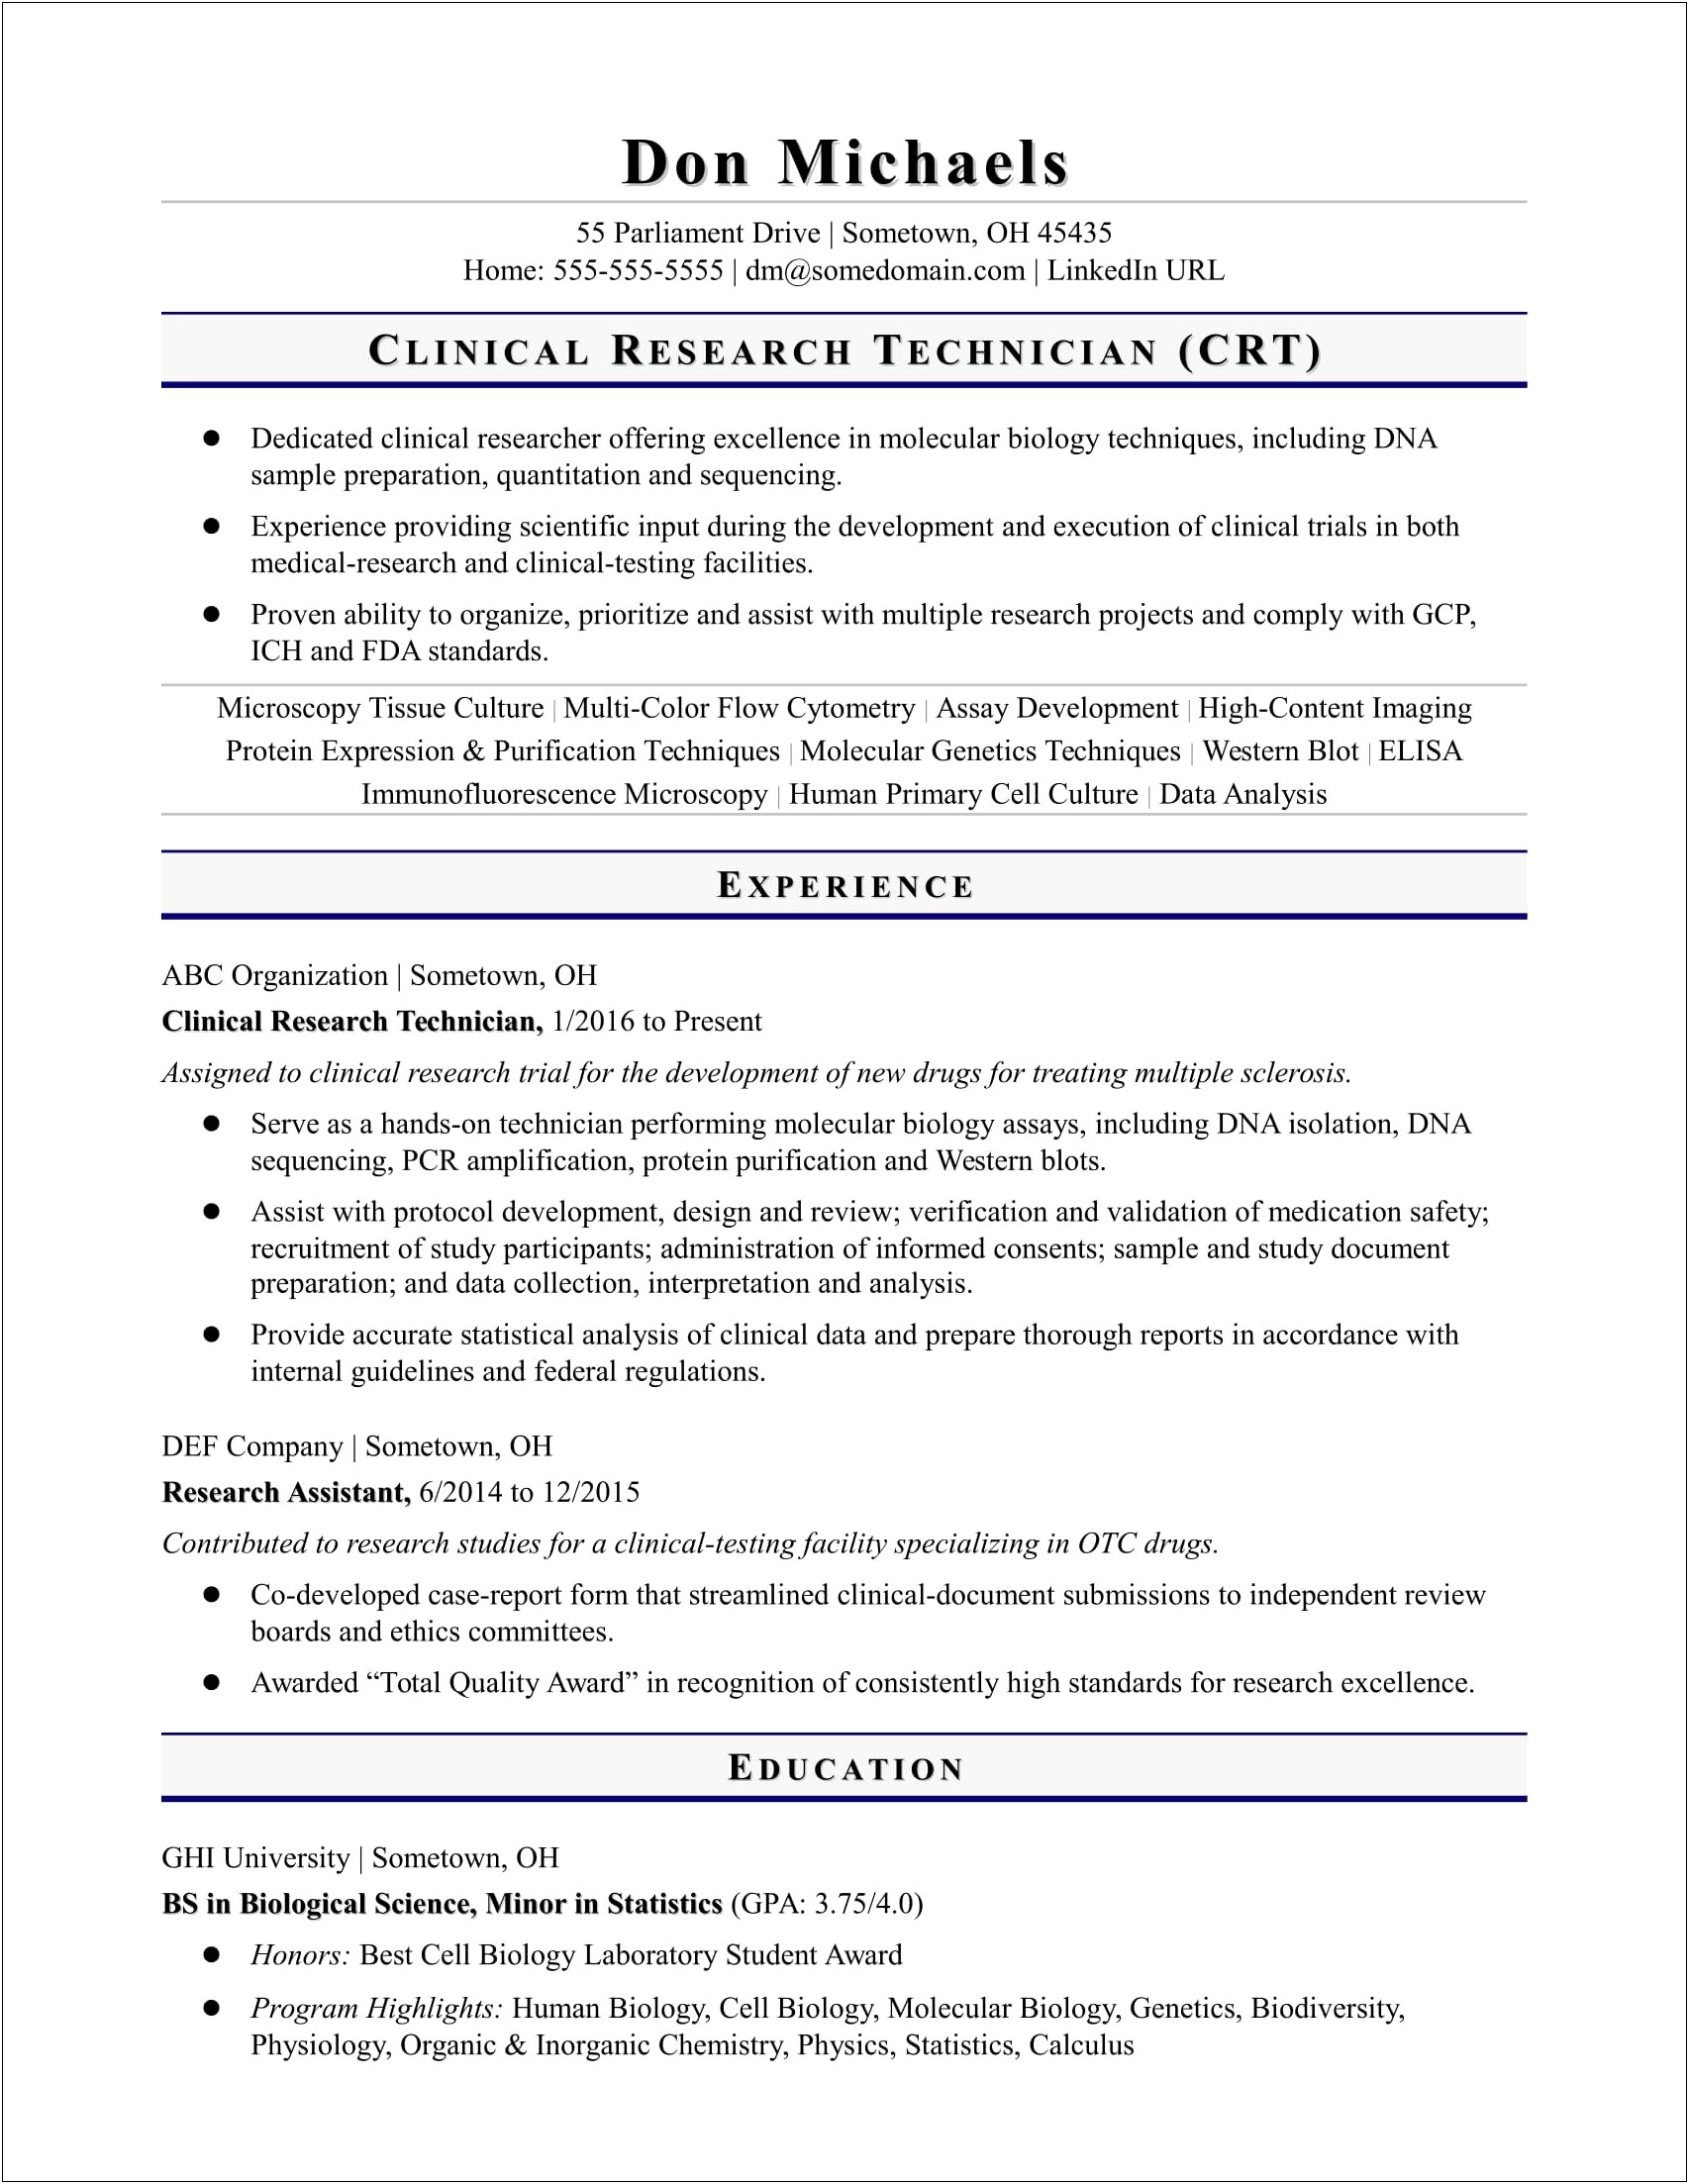 Best Summary For Research Resume